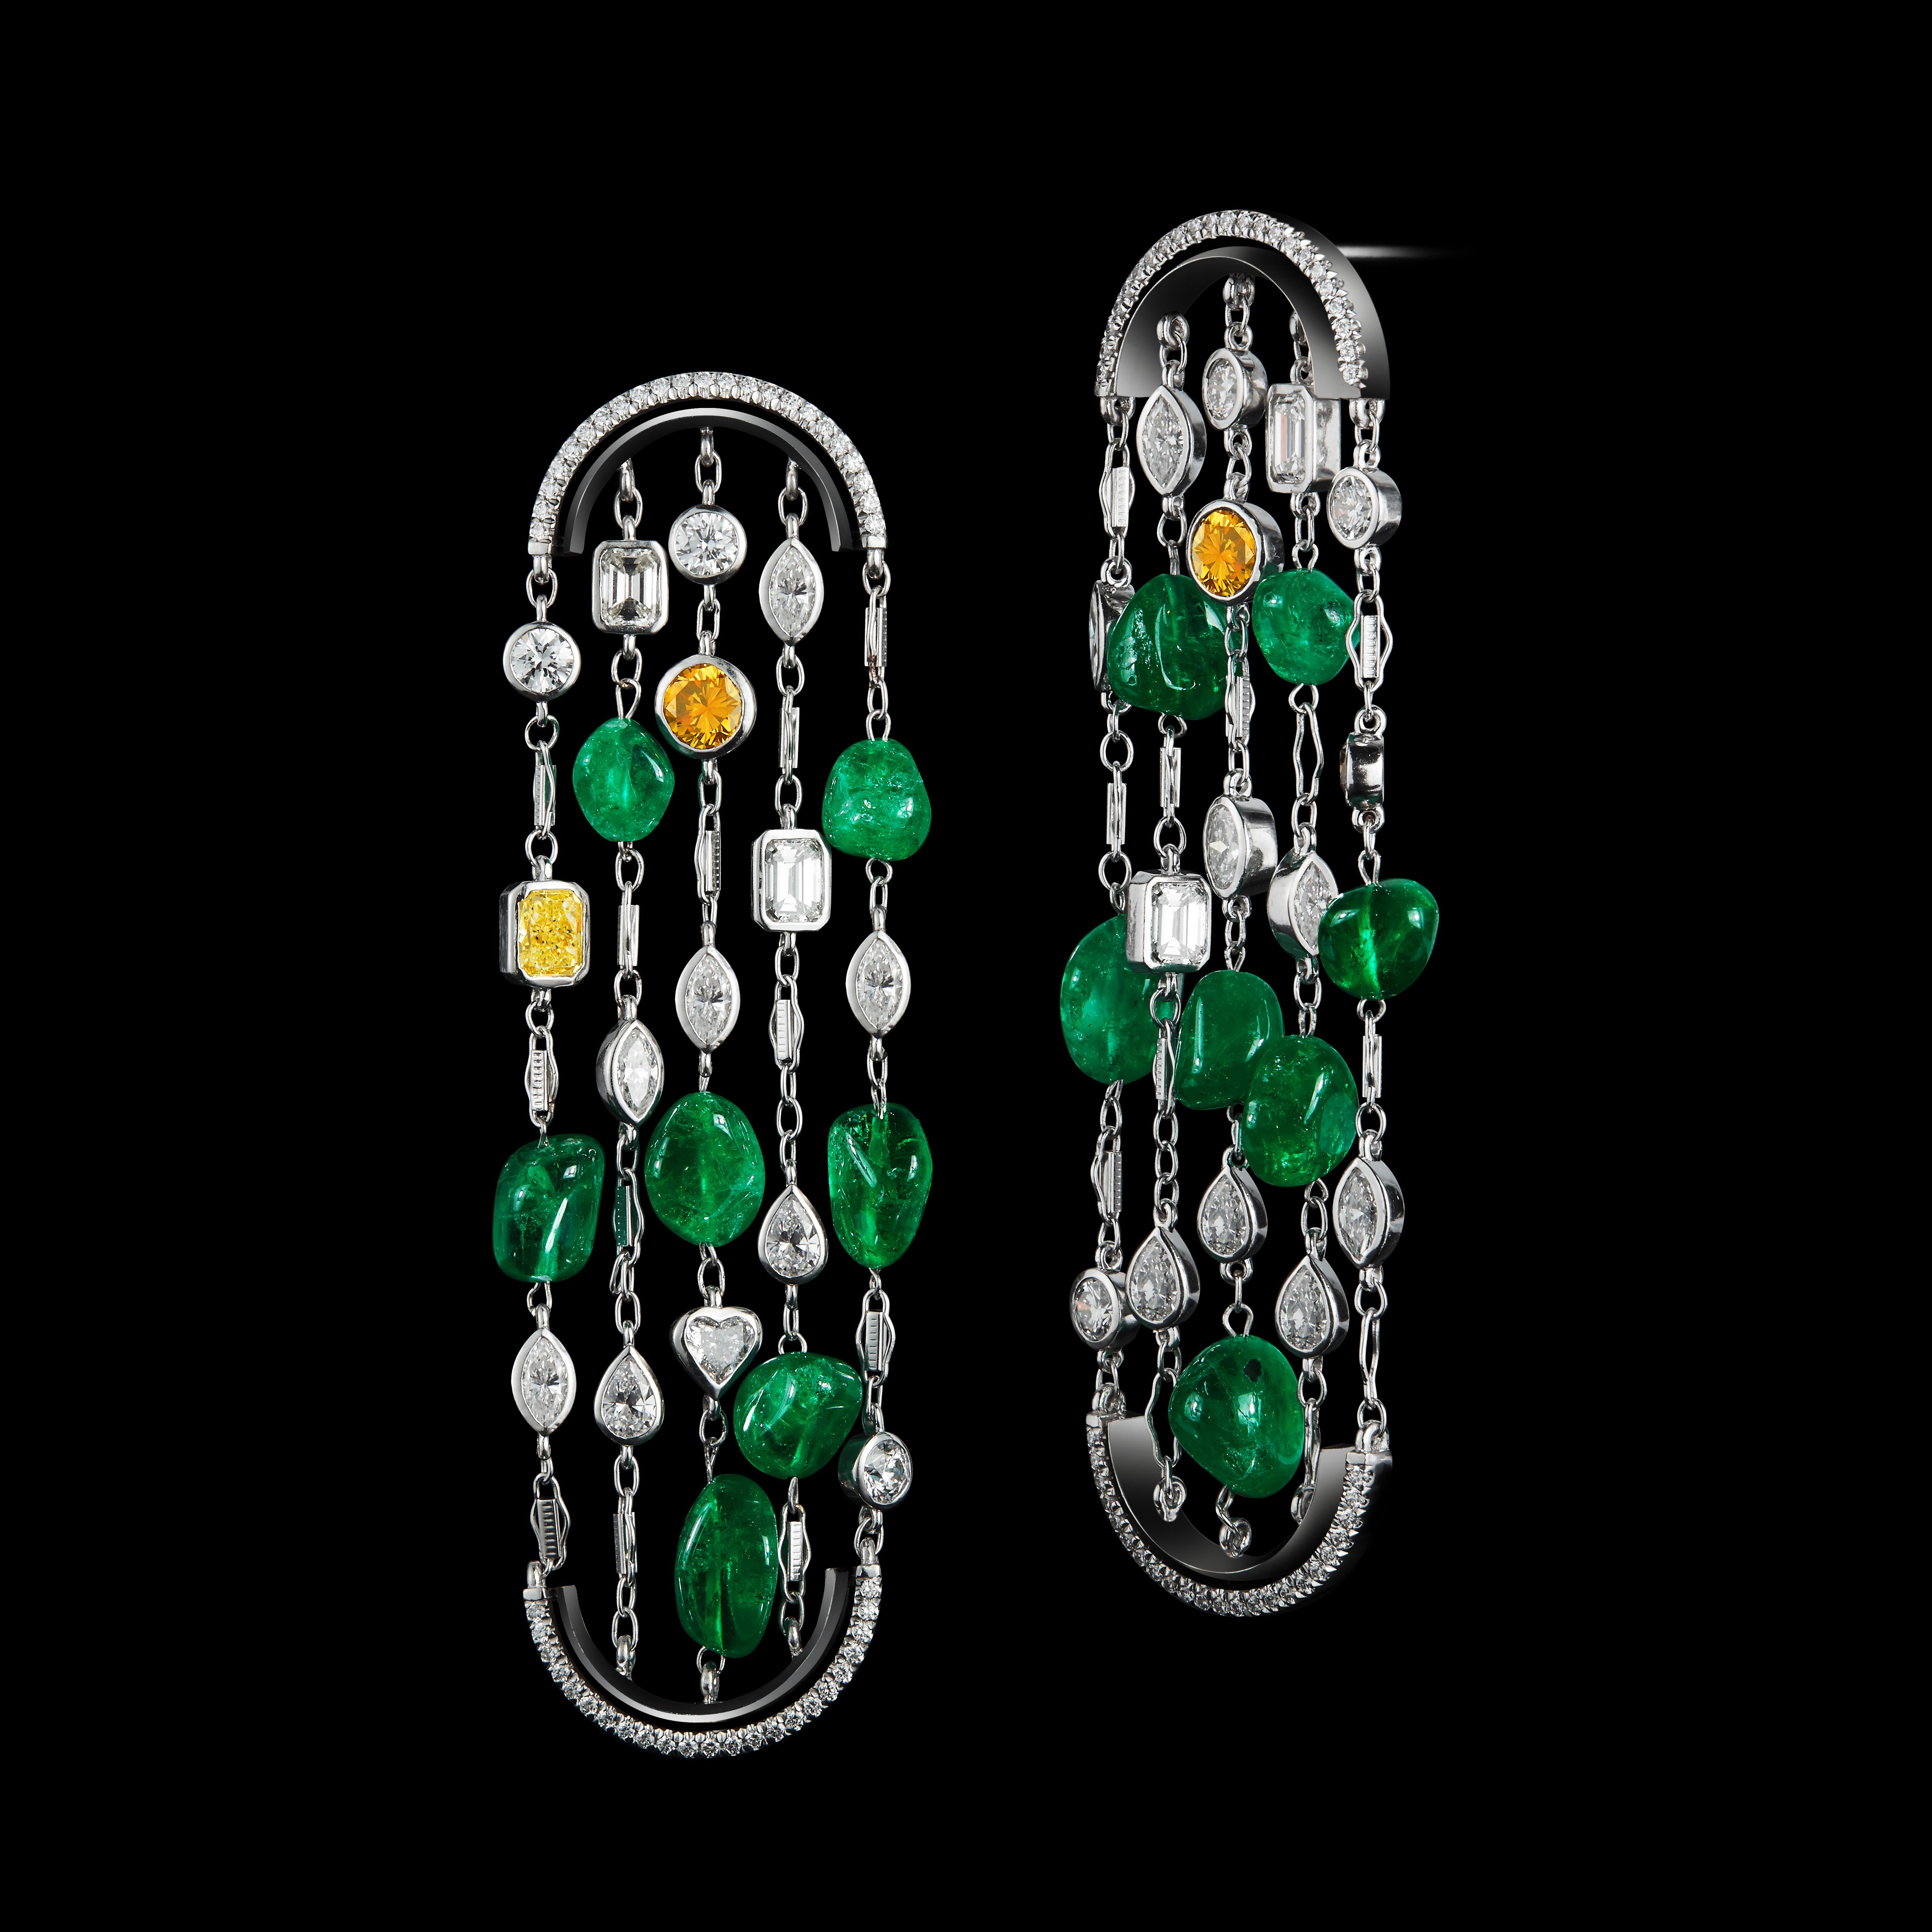 An Alexandra Mor One-Of-a-Kind arched earrings featuring Ethically-mined *Muzo Mine Colombian Emerald Nuggets and a mixture of Fancy, Brilliant, Emerald, Oval, Marquise, Heart-shape, and Radiant-Cut Diamonds. Earrings are set in platinum and 18